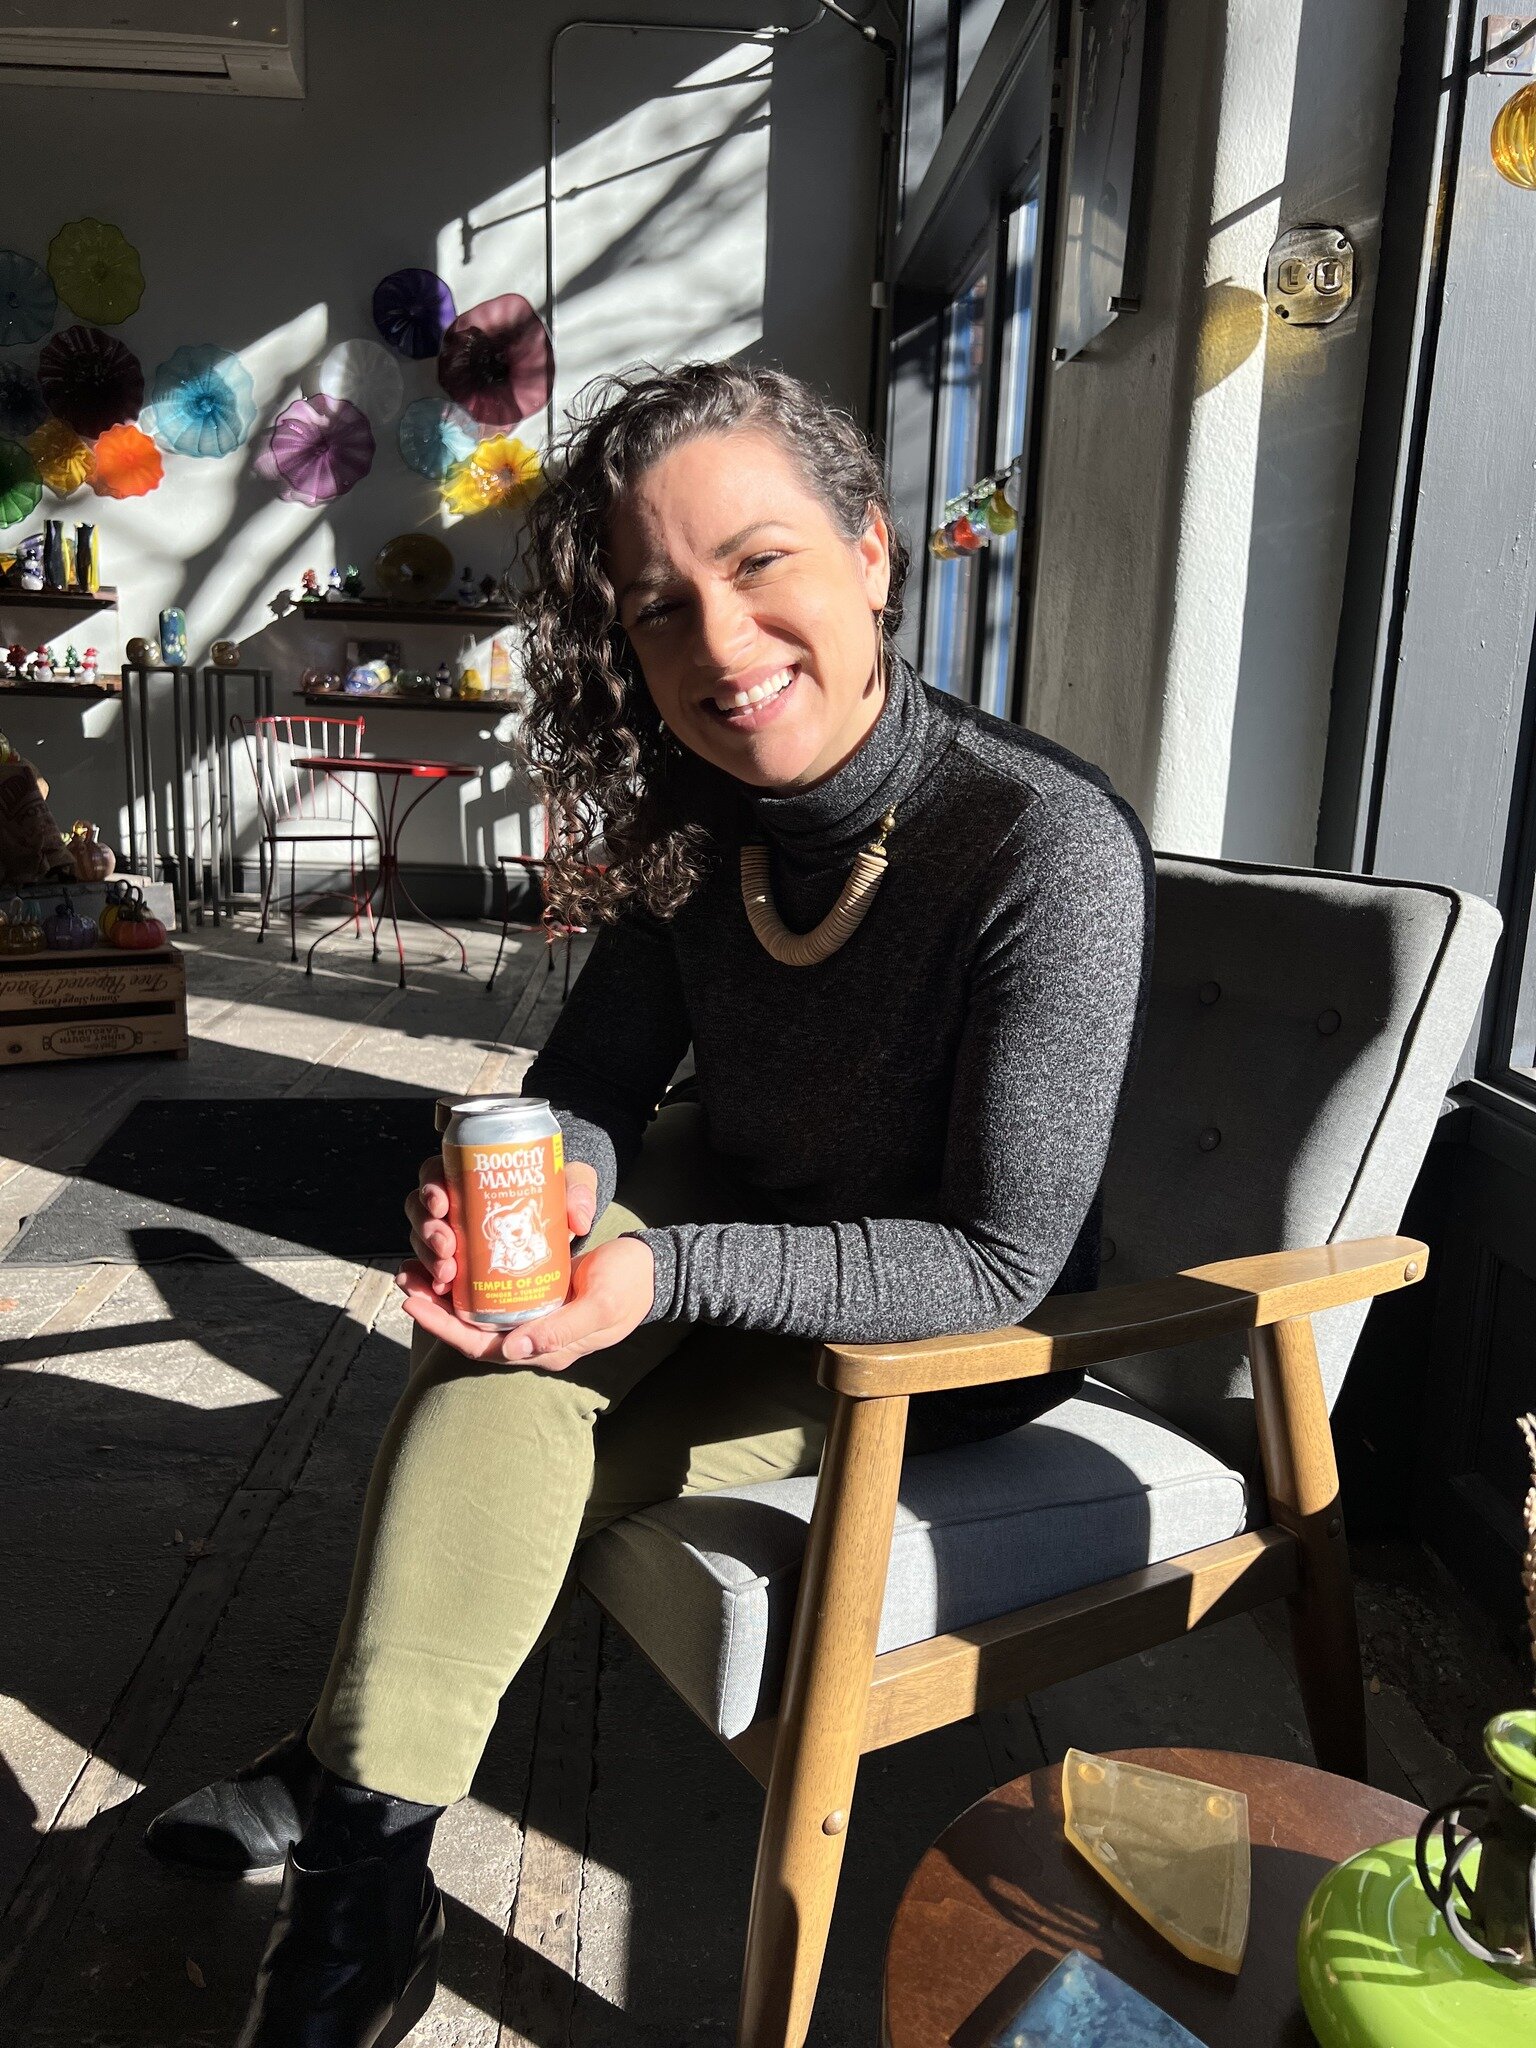 Our first Staff Pick! ✨ It's Emily! Our beloved Saturday Boochtender and behind the scenes Newsletter guru, and friend to all. Emily's pick is Temple of Gold! ✨ It was the first Boochy Mama's Kombucha flavor she tried, and it has been her go-to ever 